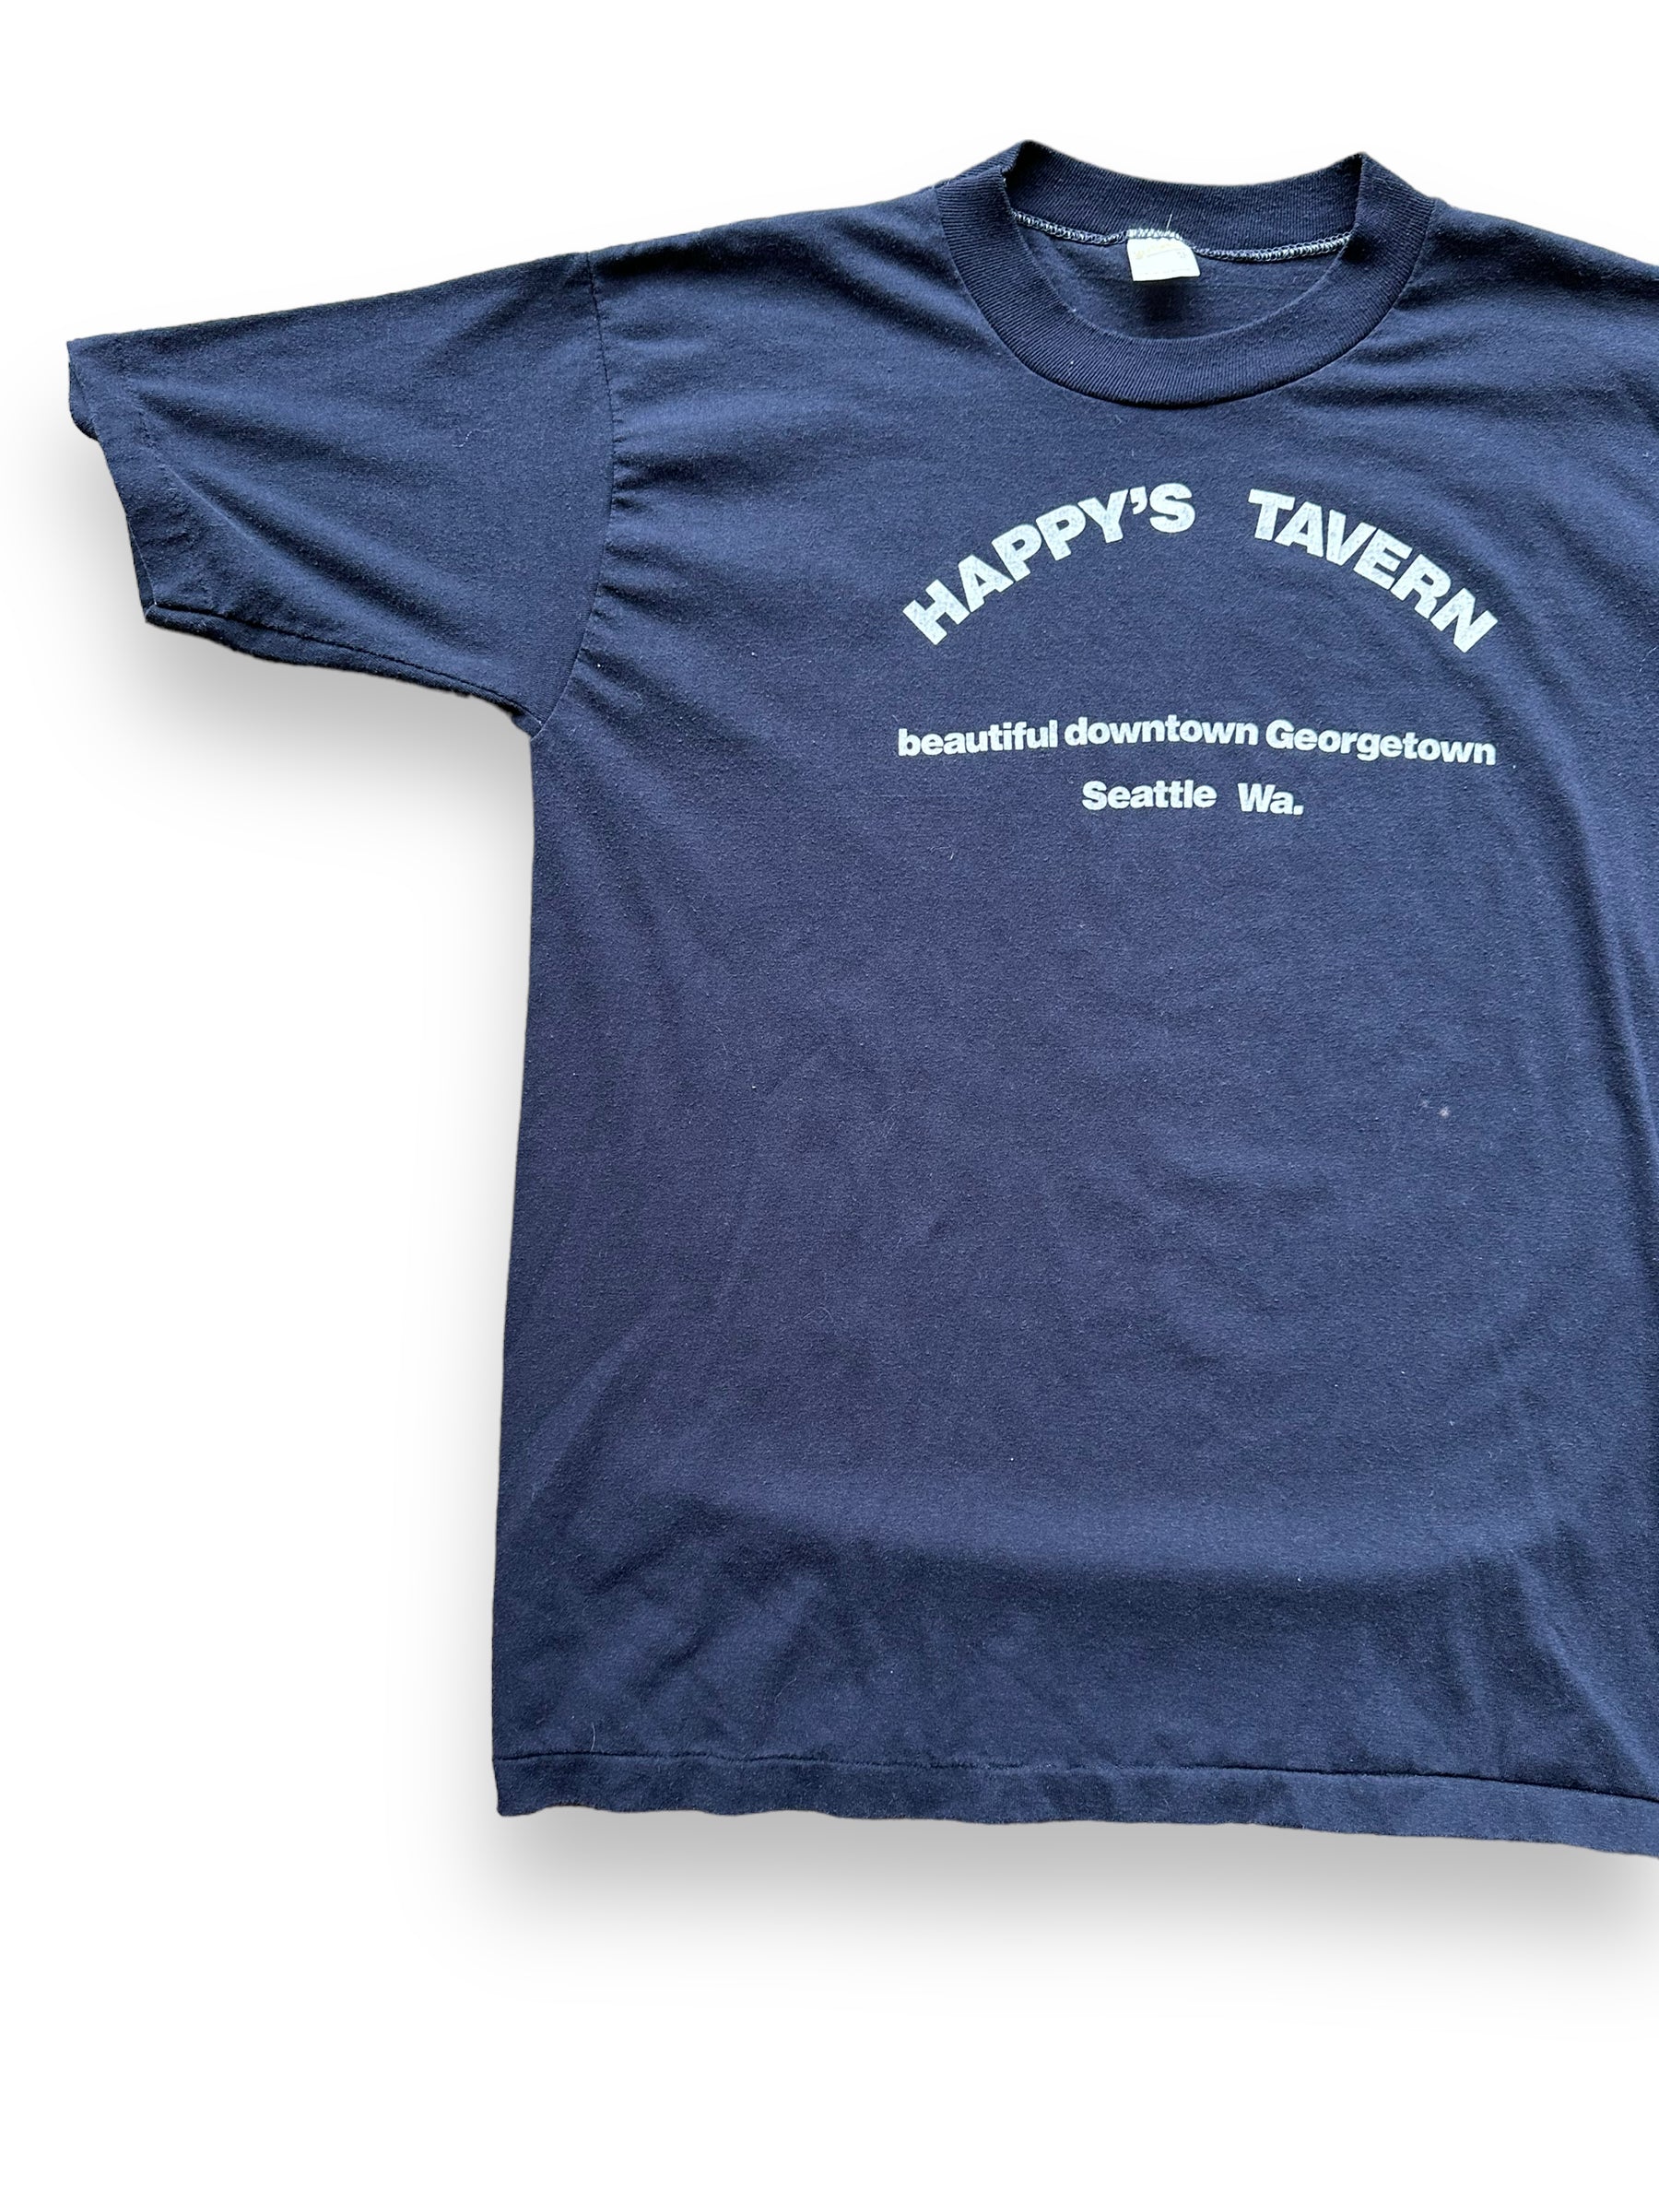 Front Right View of Vintage Happys Tavern Georgetown Tee SZ XL | Vintage Single Stitch T-Shirts Seattle | Barn Owl Vintage Tees Seattle